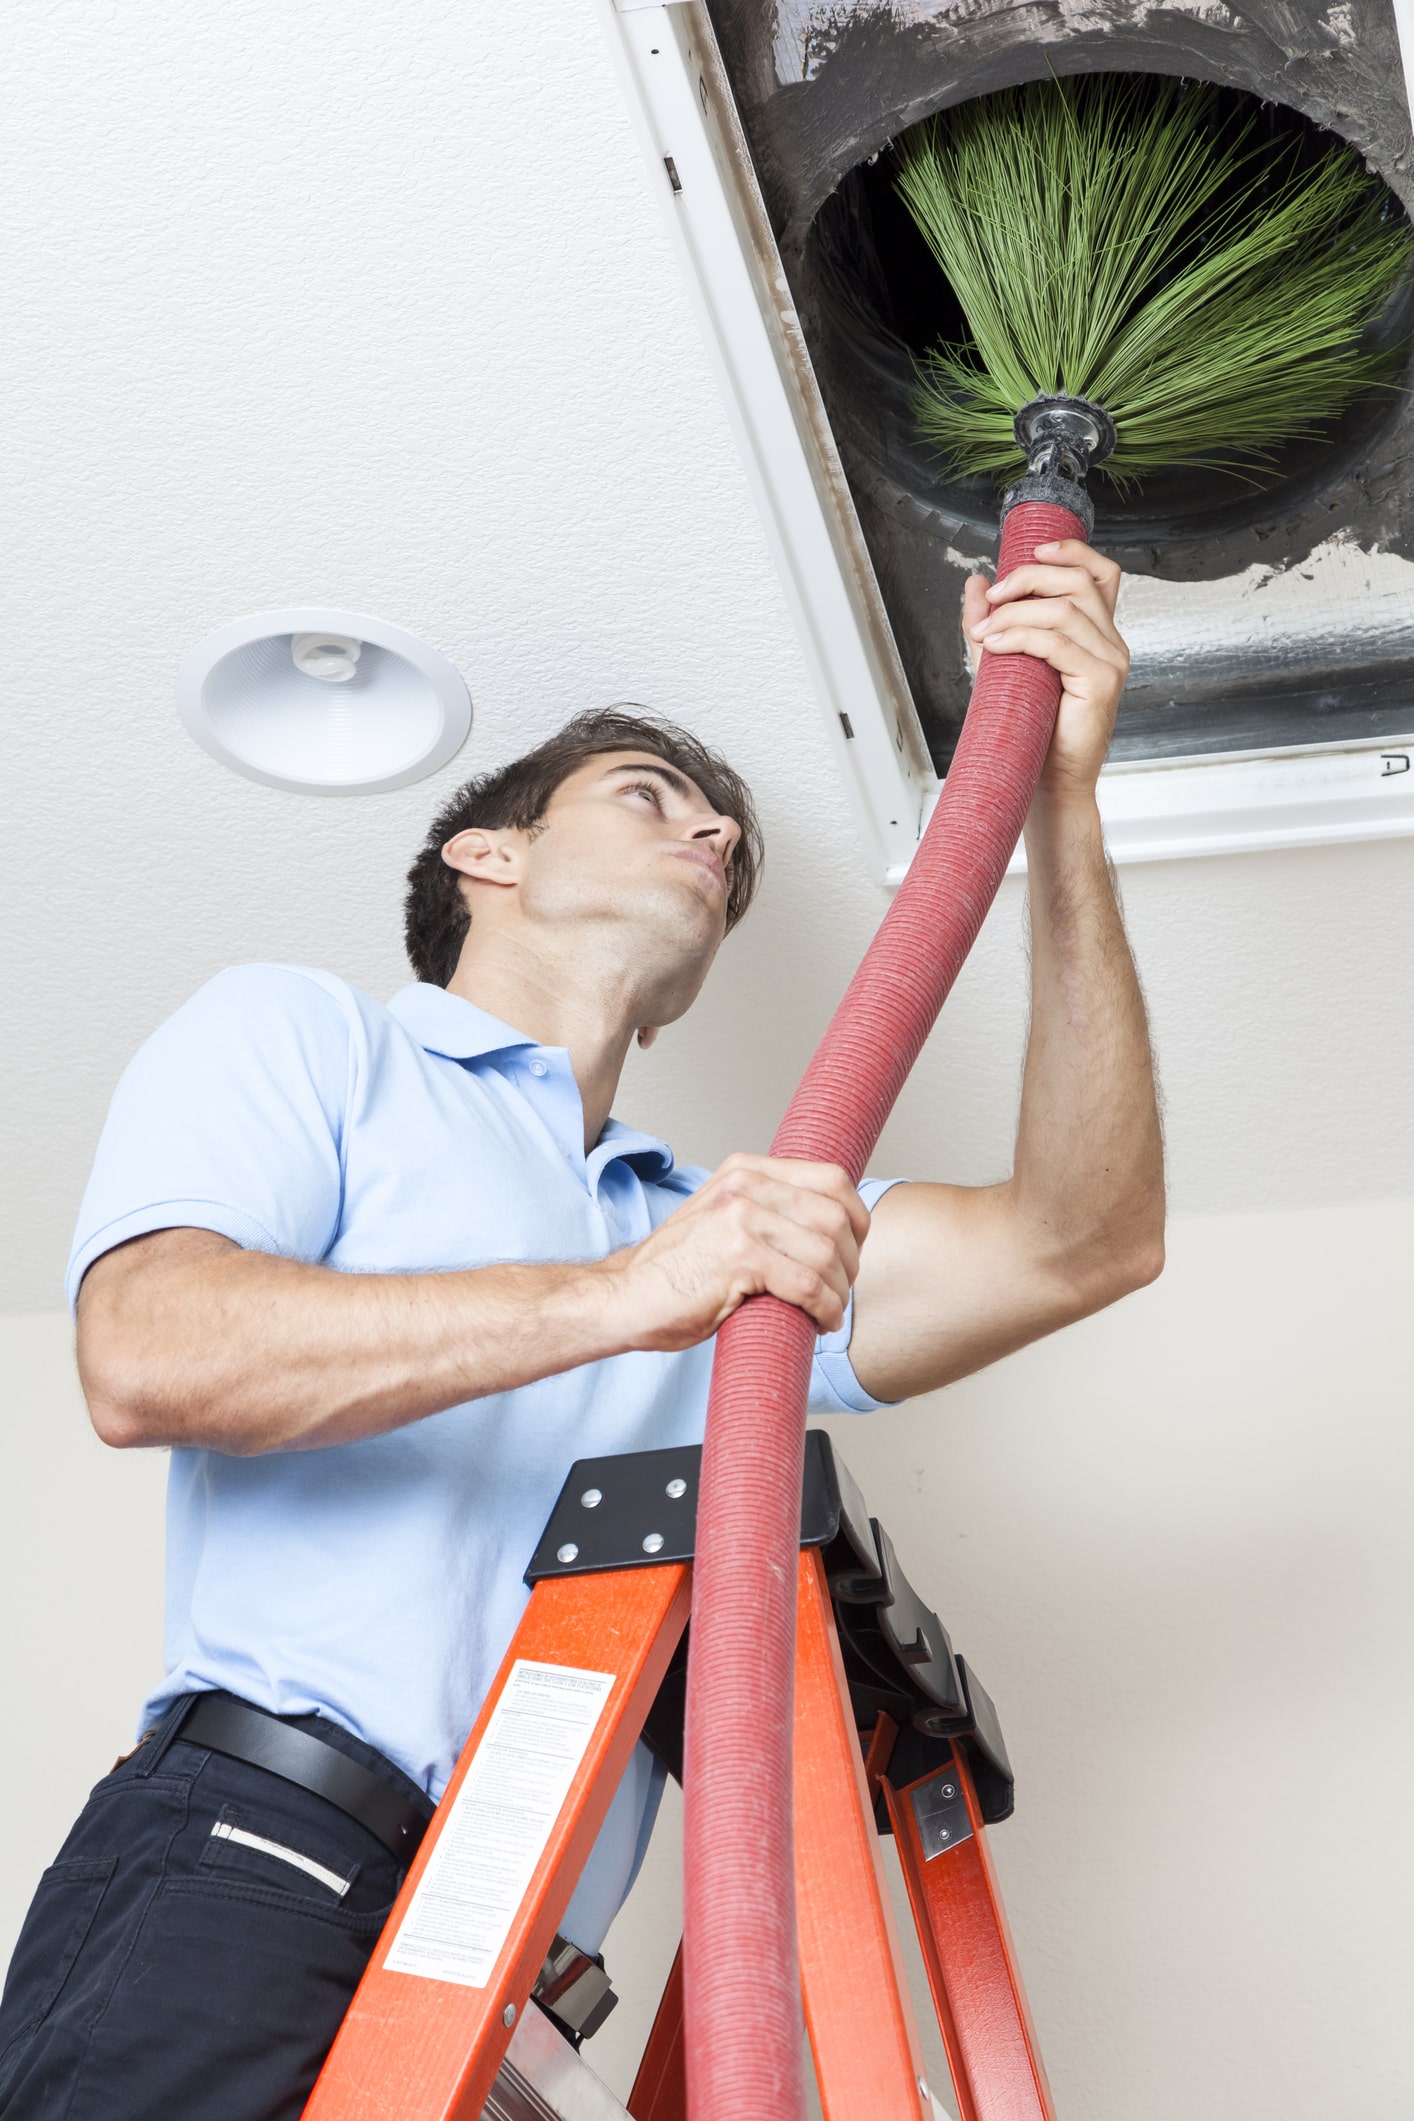 duct cleaning in Plainfield IL, Naperville IL, and Romeoville IL.